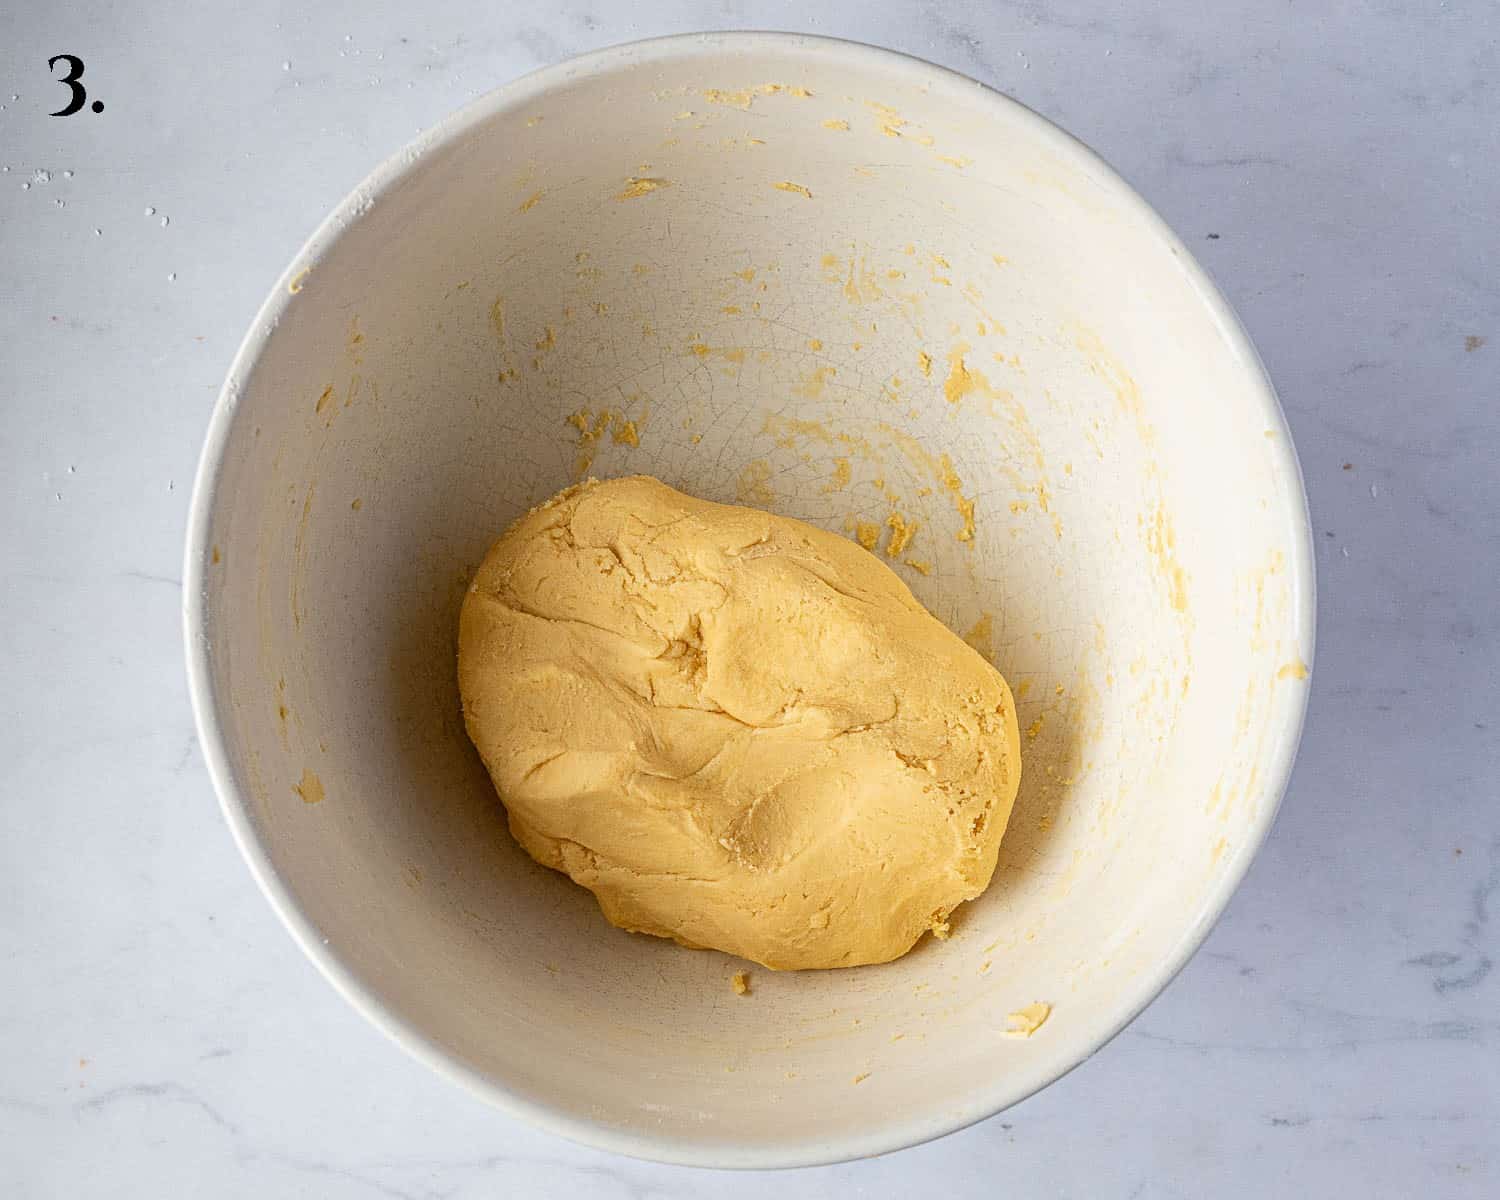 Step 3, the finished dough.